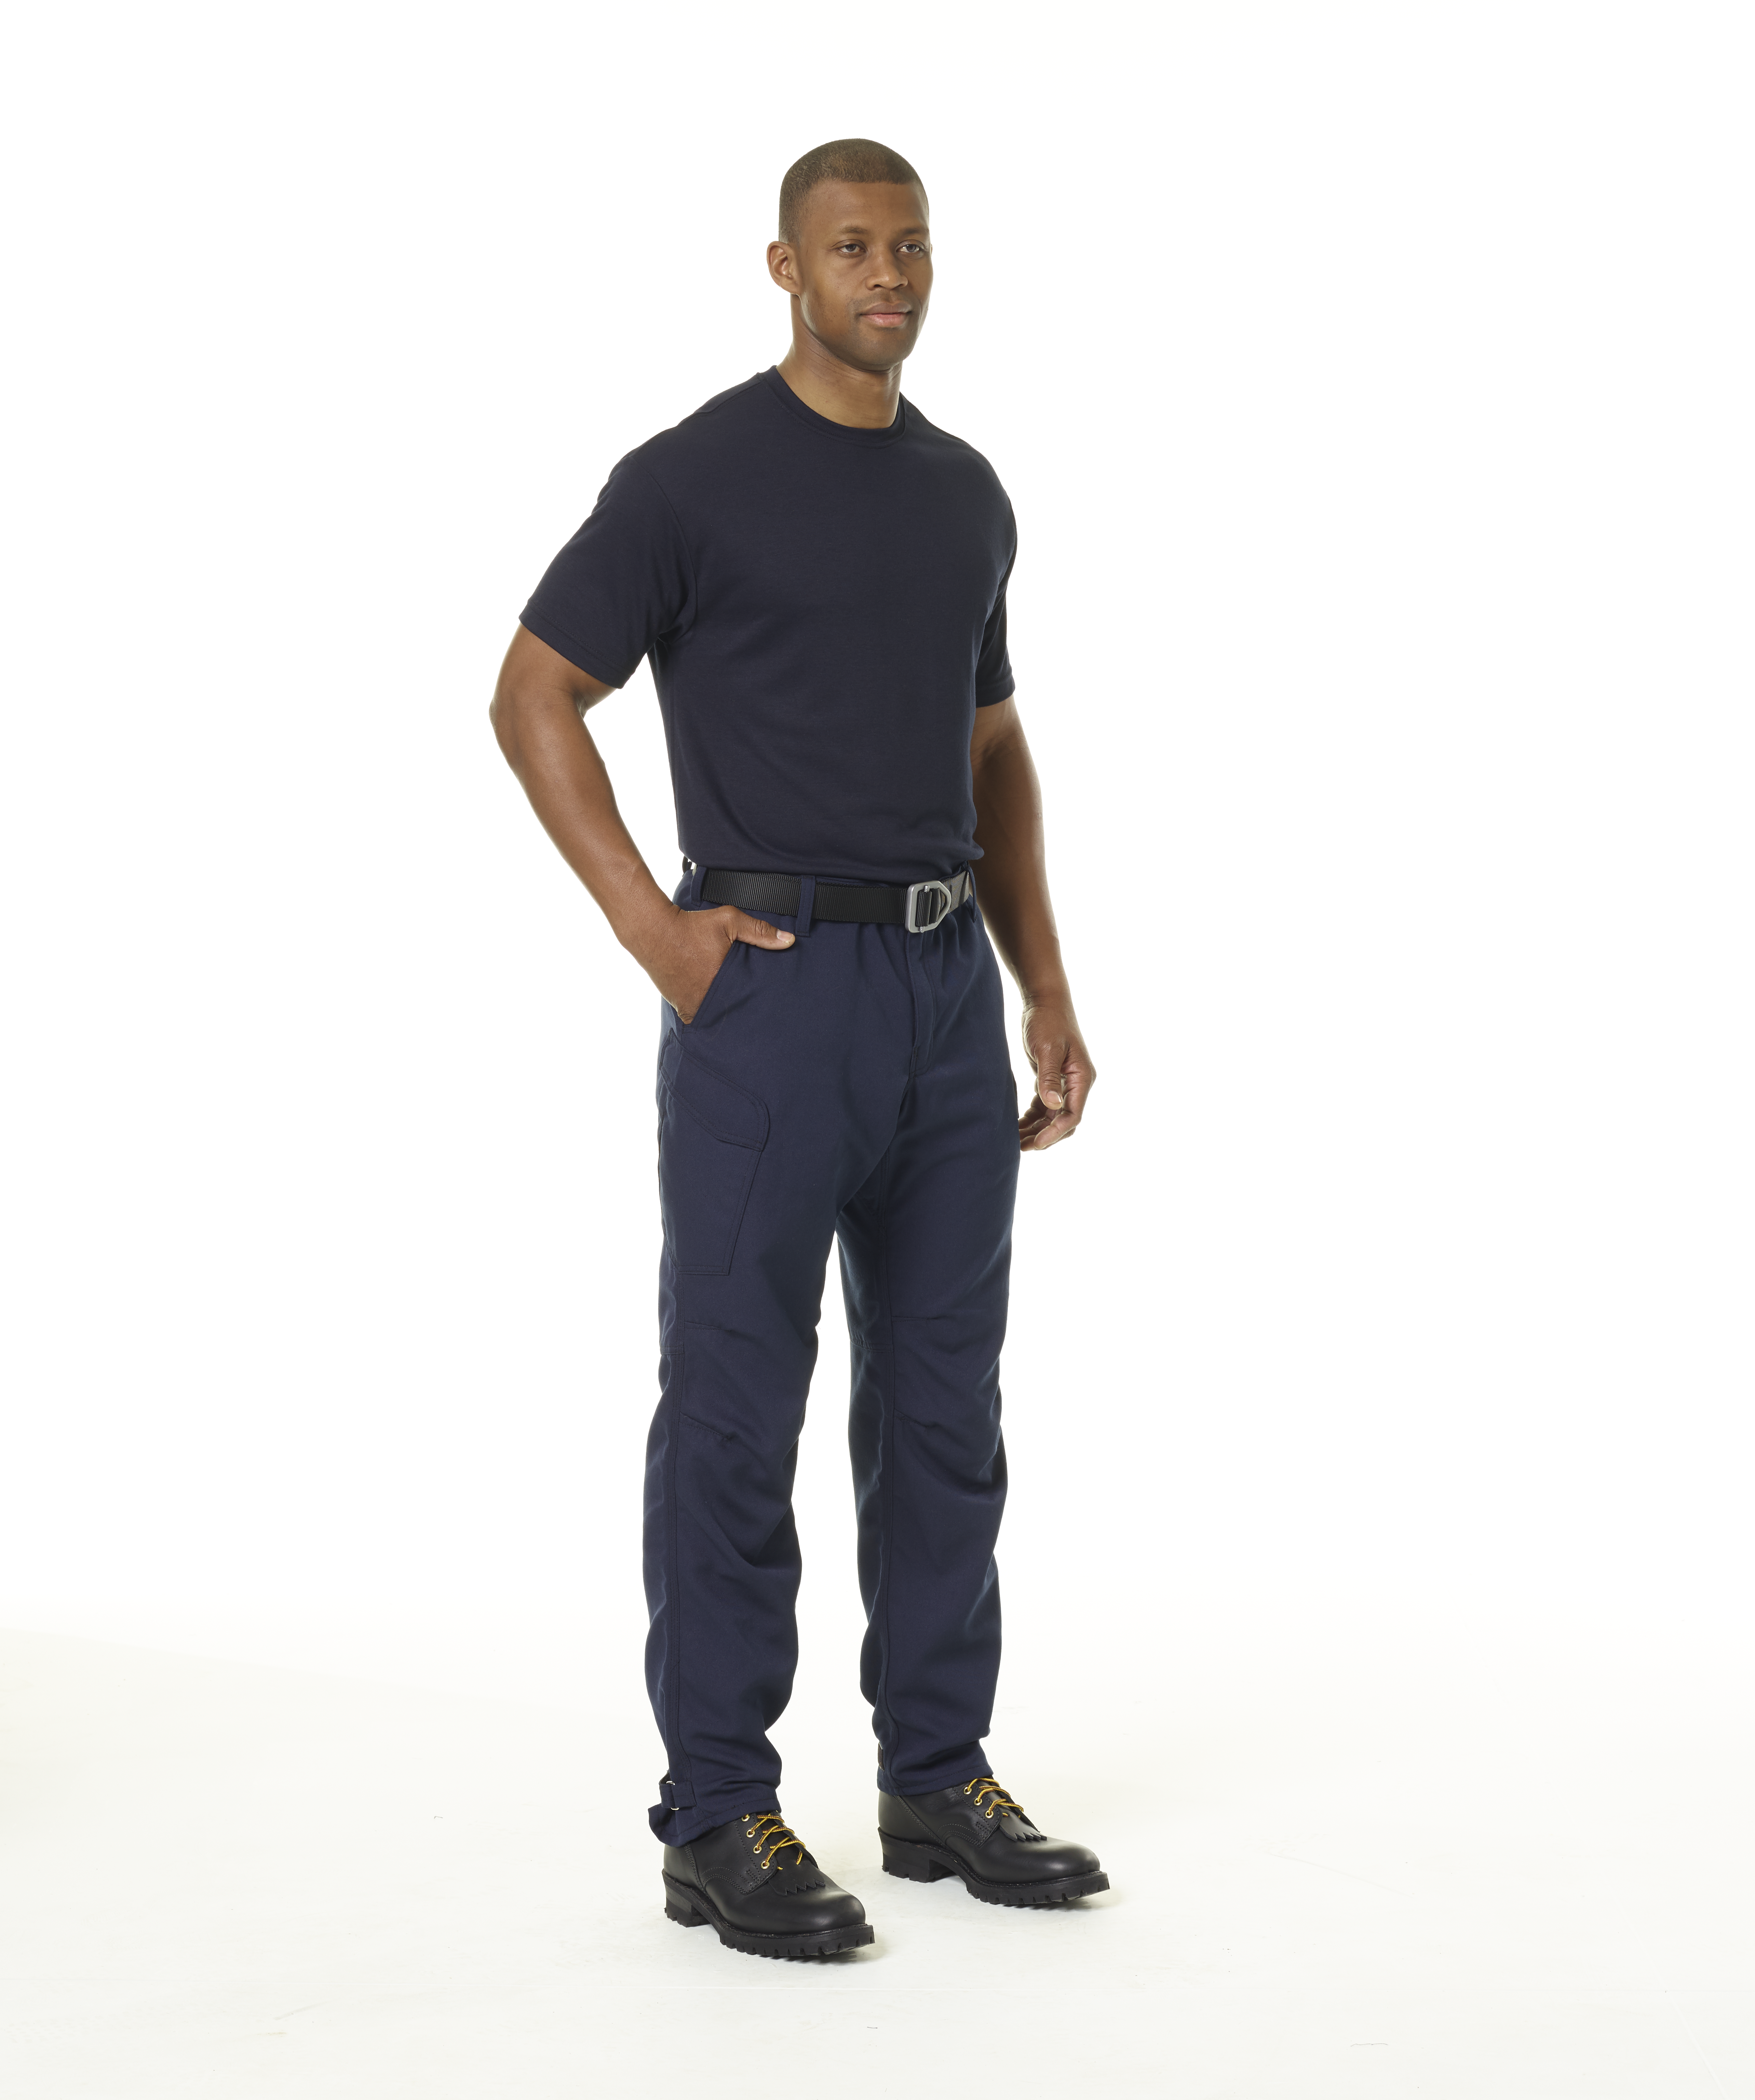 511 navy blue tactical pants Mens Fashion Bottoms Trousers on Carousell